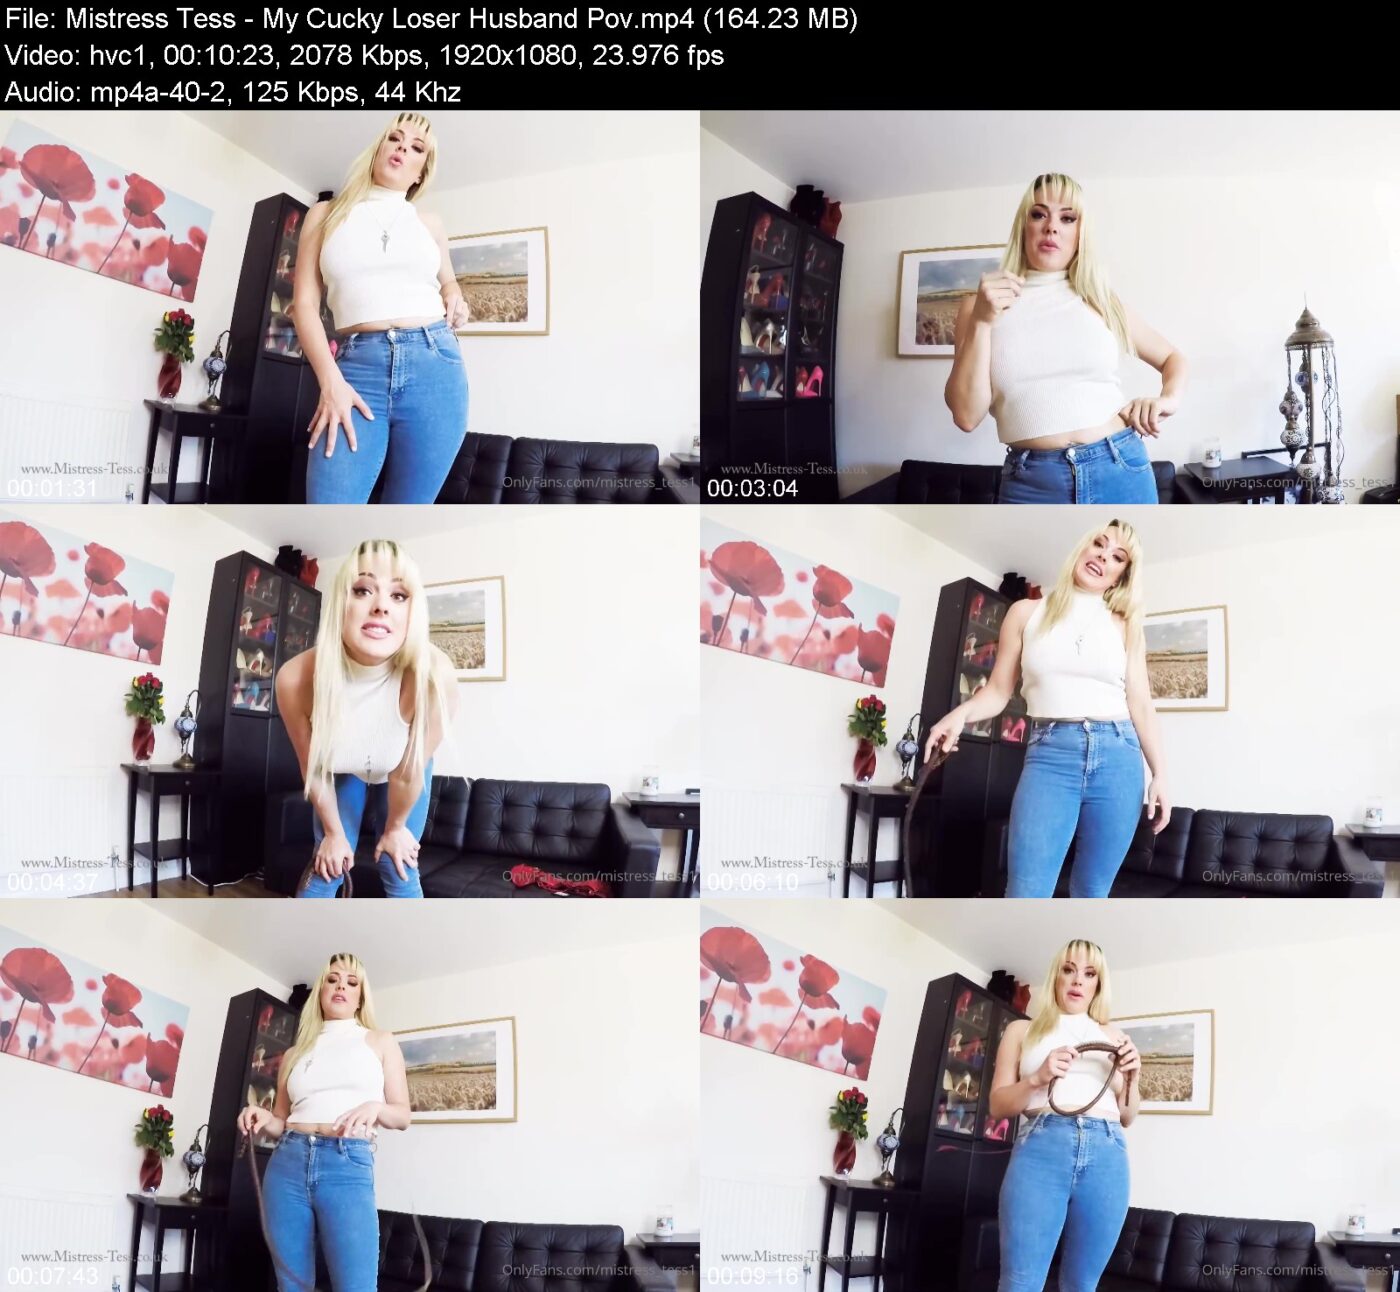 Actress: Mistress Tess. Title and Studio: My Cucky Loser Husband Pov